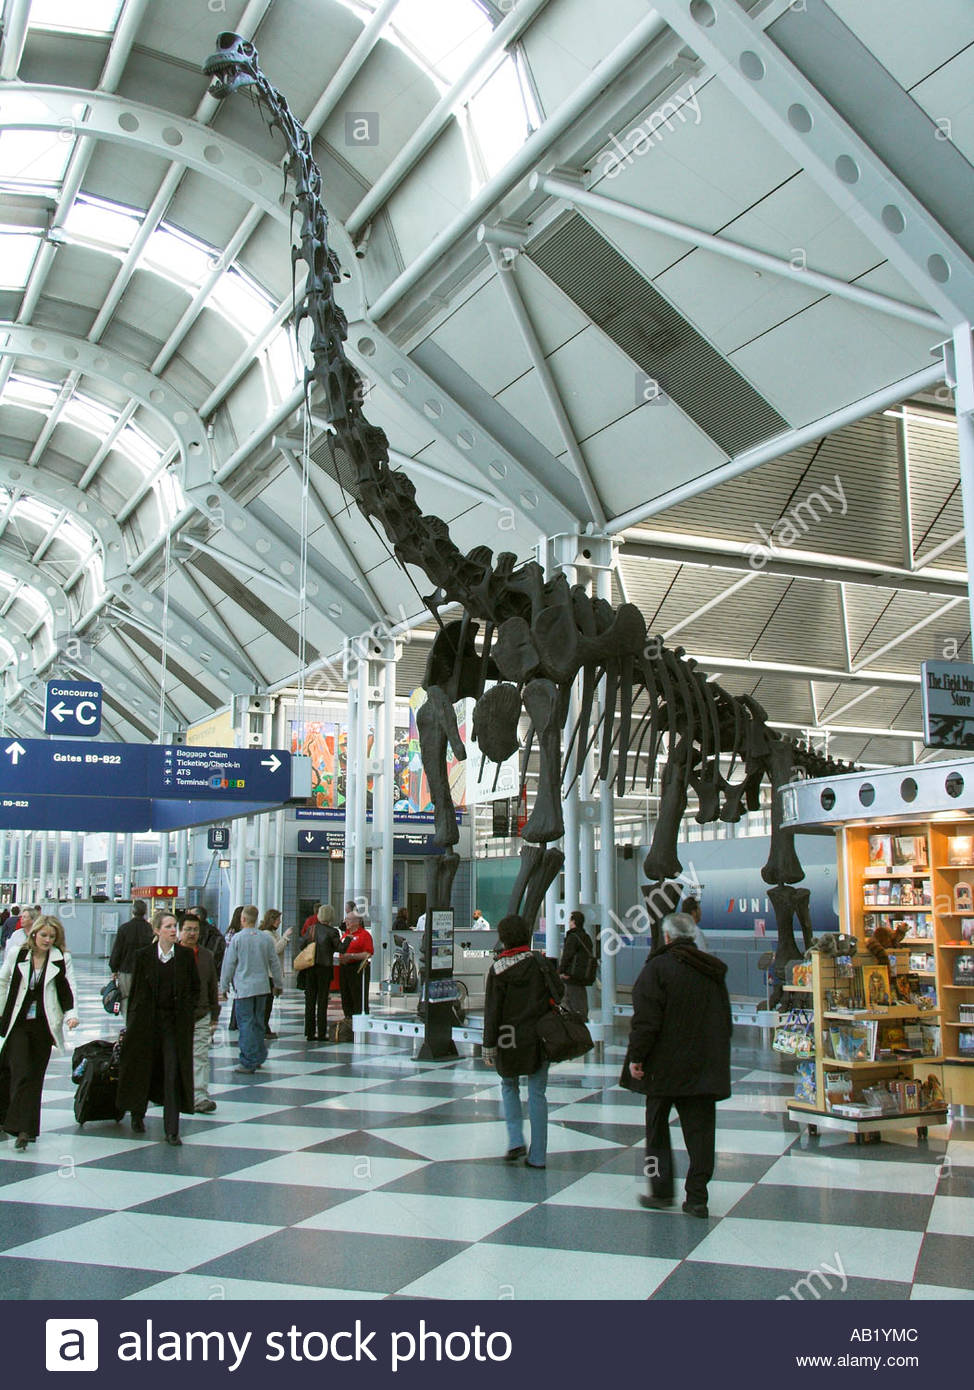 moulded-dinosaur-skeleton-in-united-airlines-chicago-ohare-airport-AB1YMC.jpg